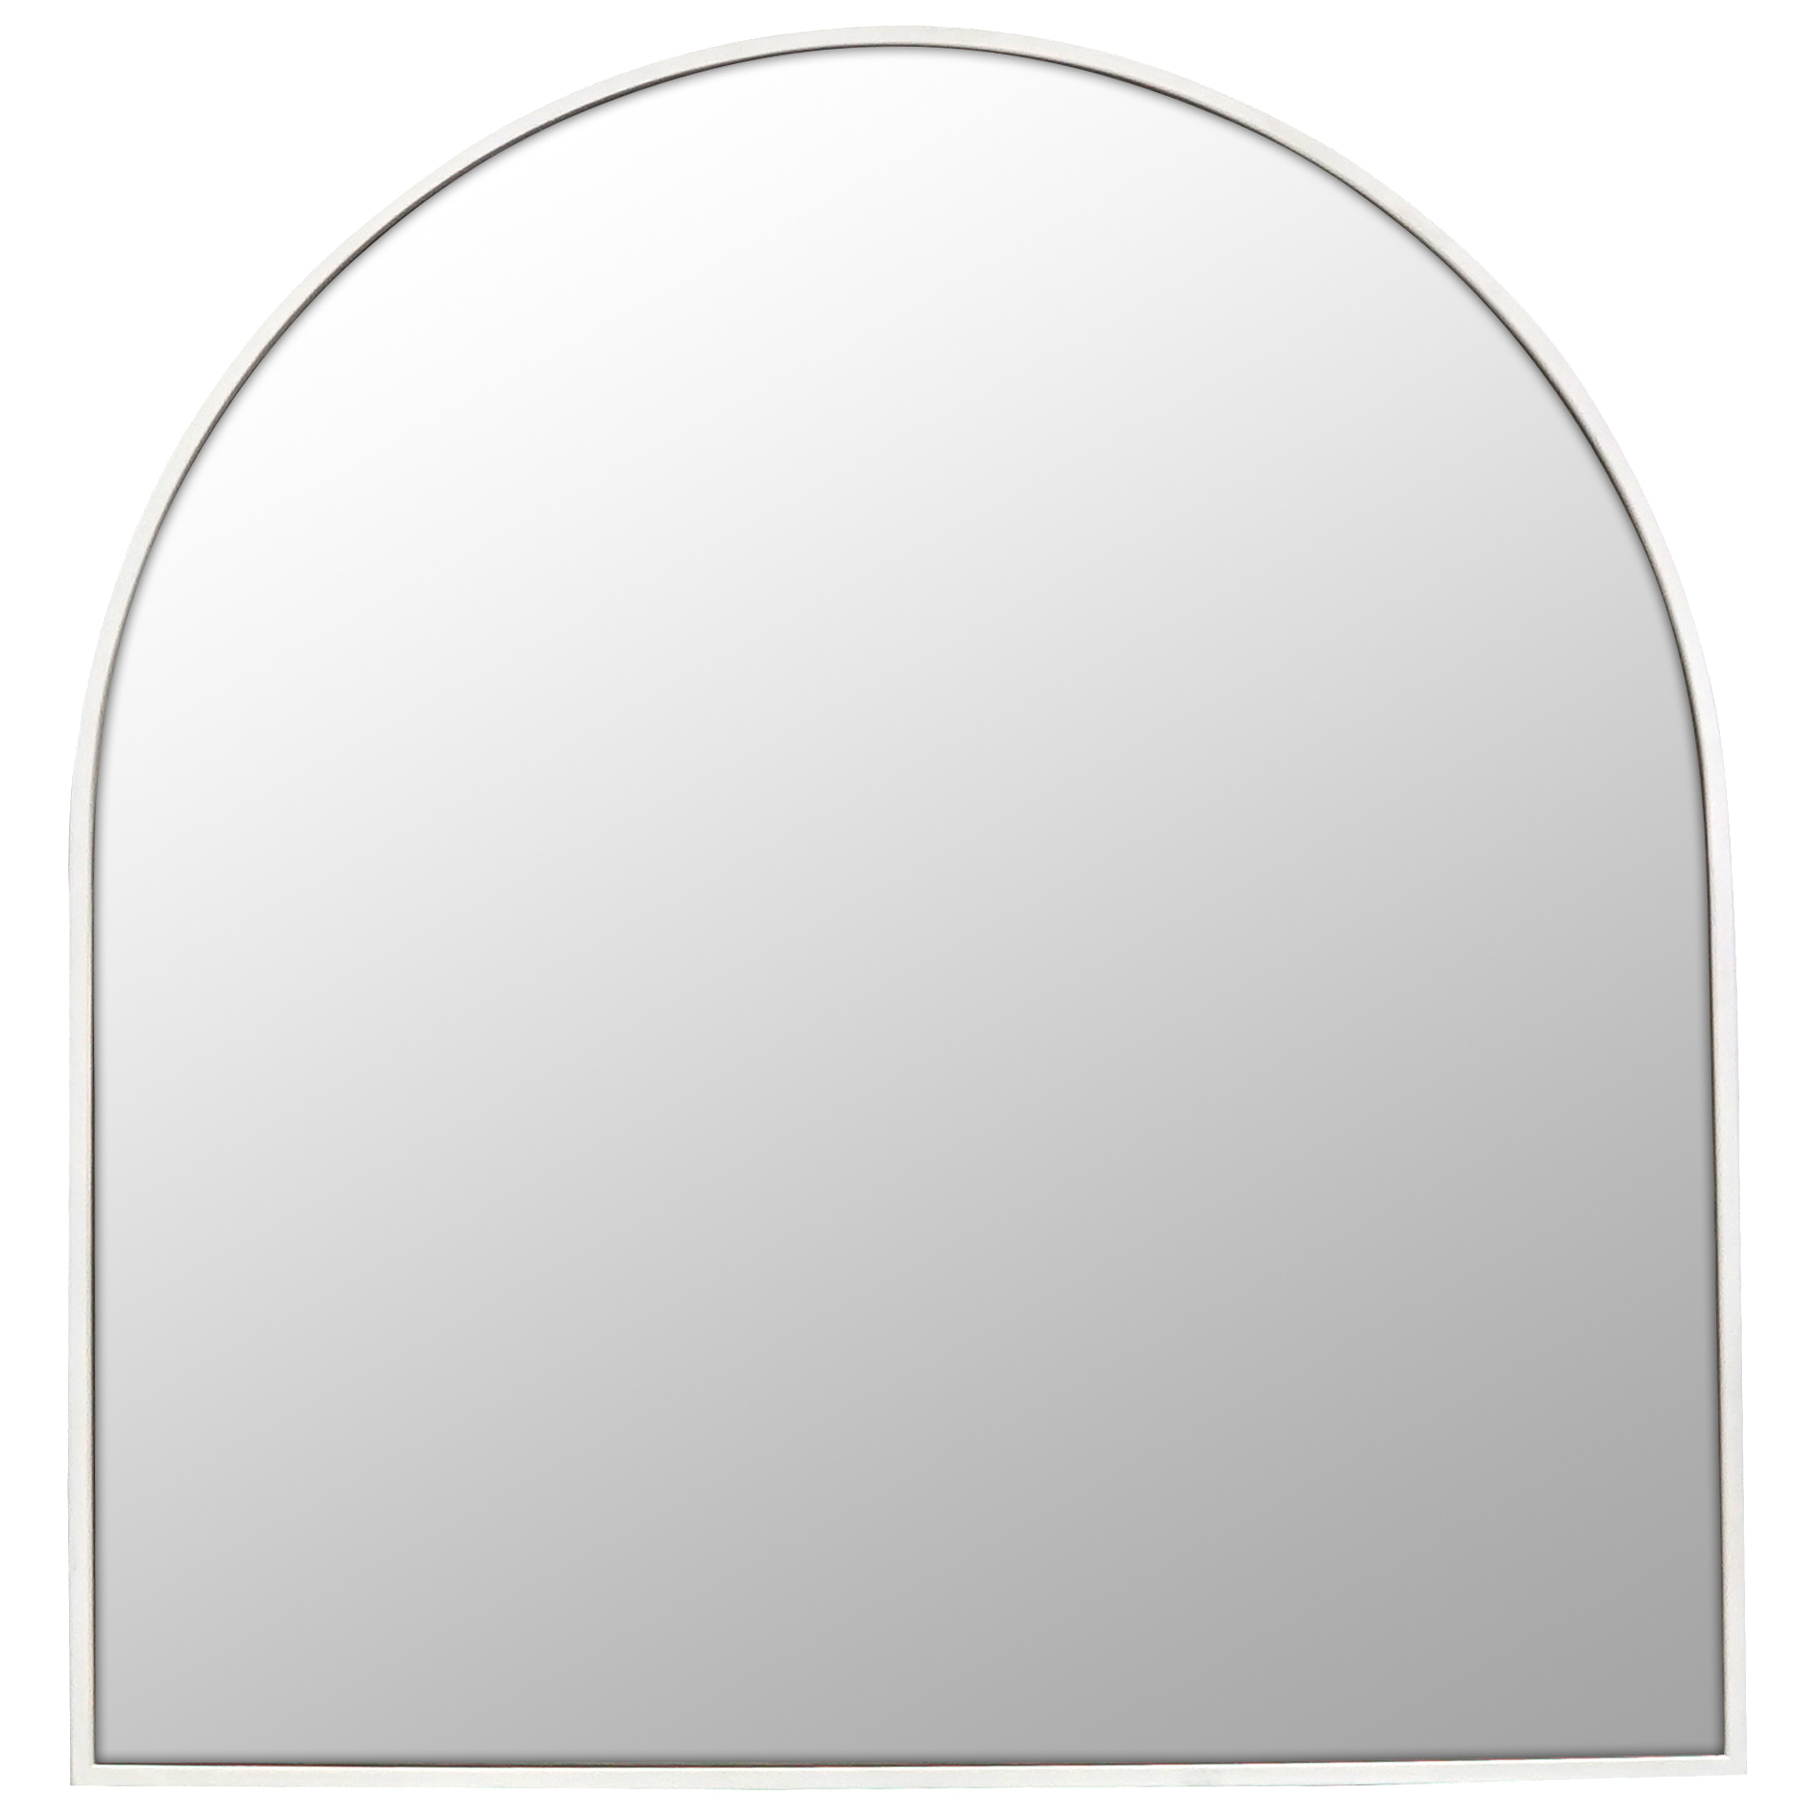 Futureglass Arched Stainless Steel Wall, Modern Stainless Steel Frame Mirror